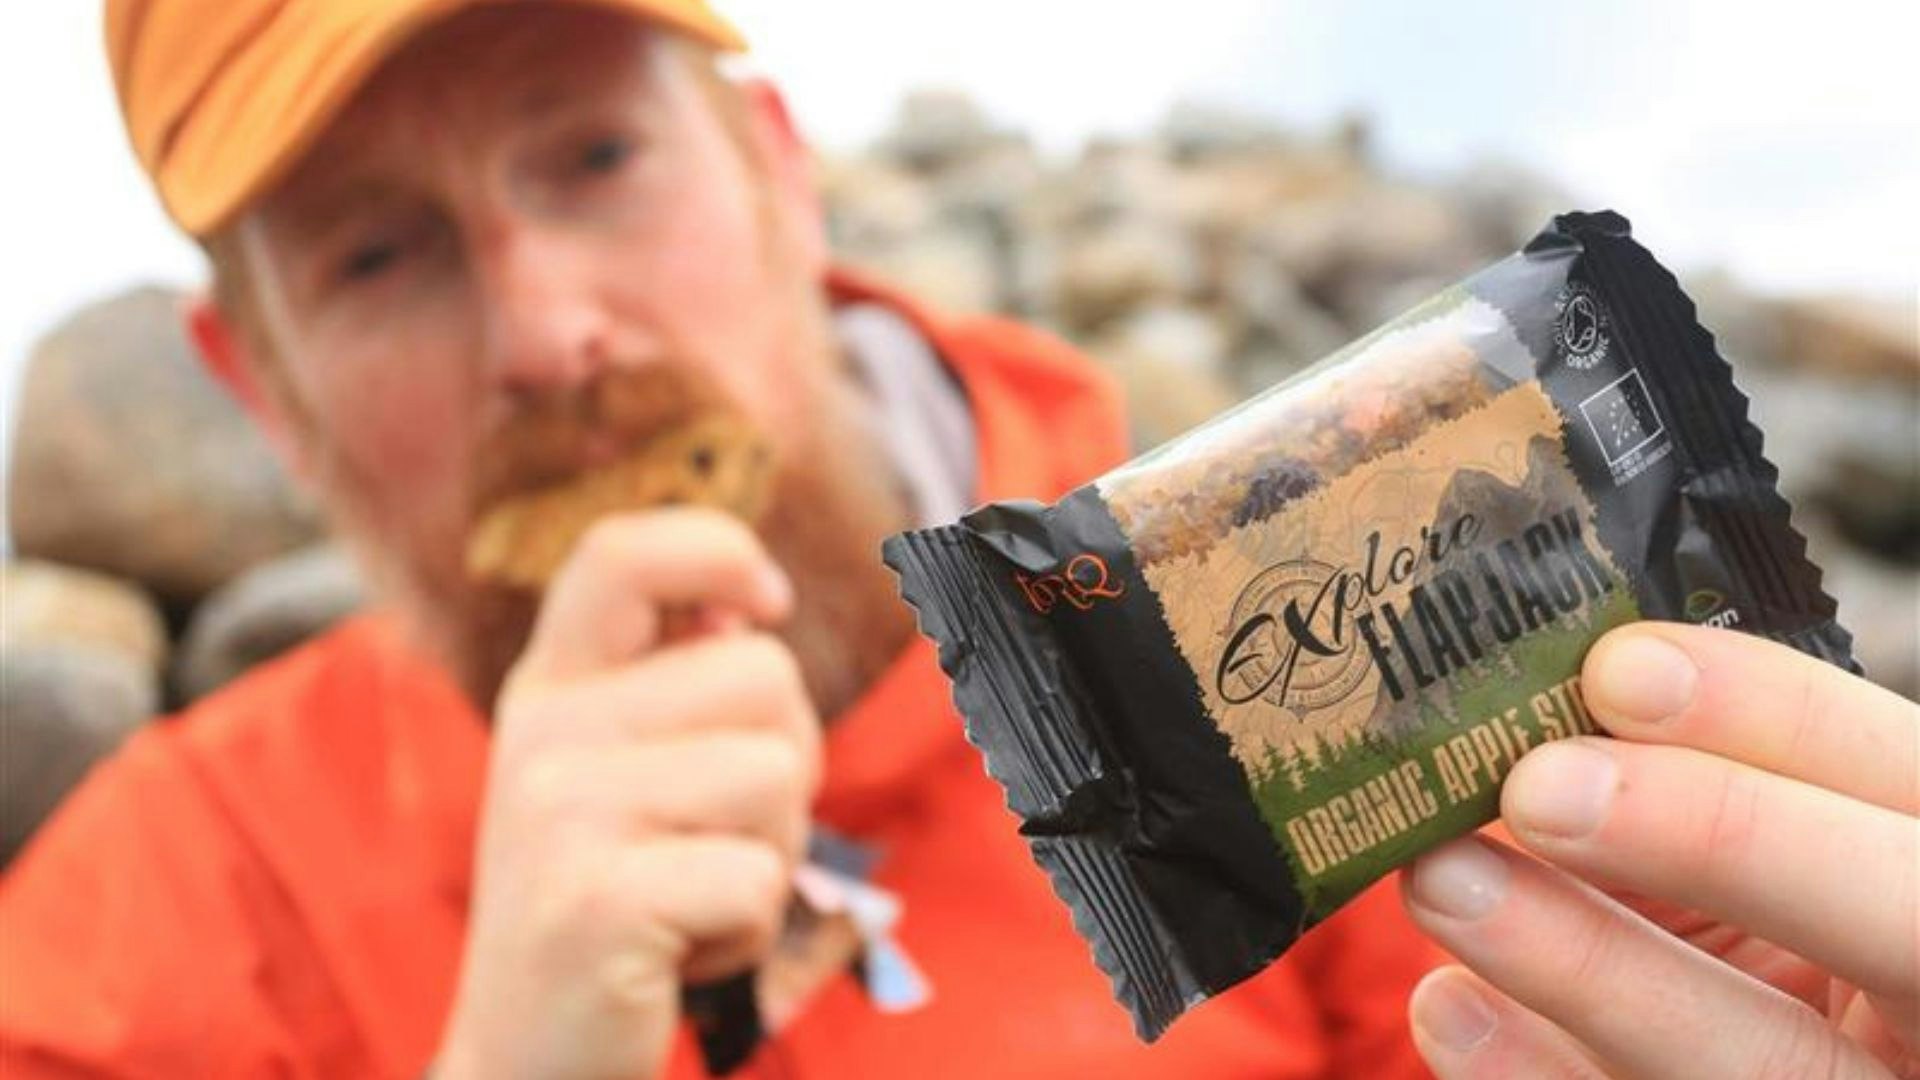 Ben shows us an organic flapjack, perhaps an ultimate hiking snack